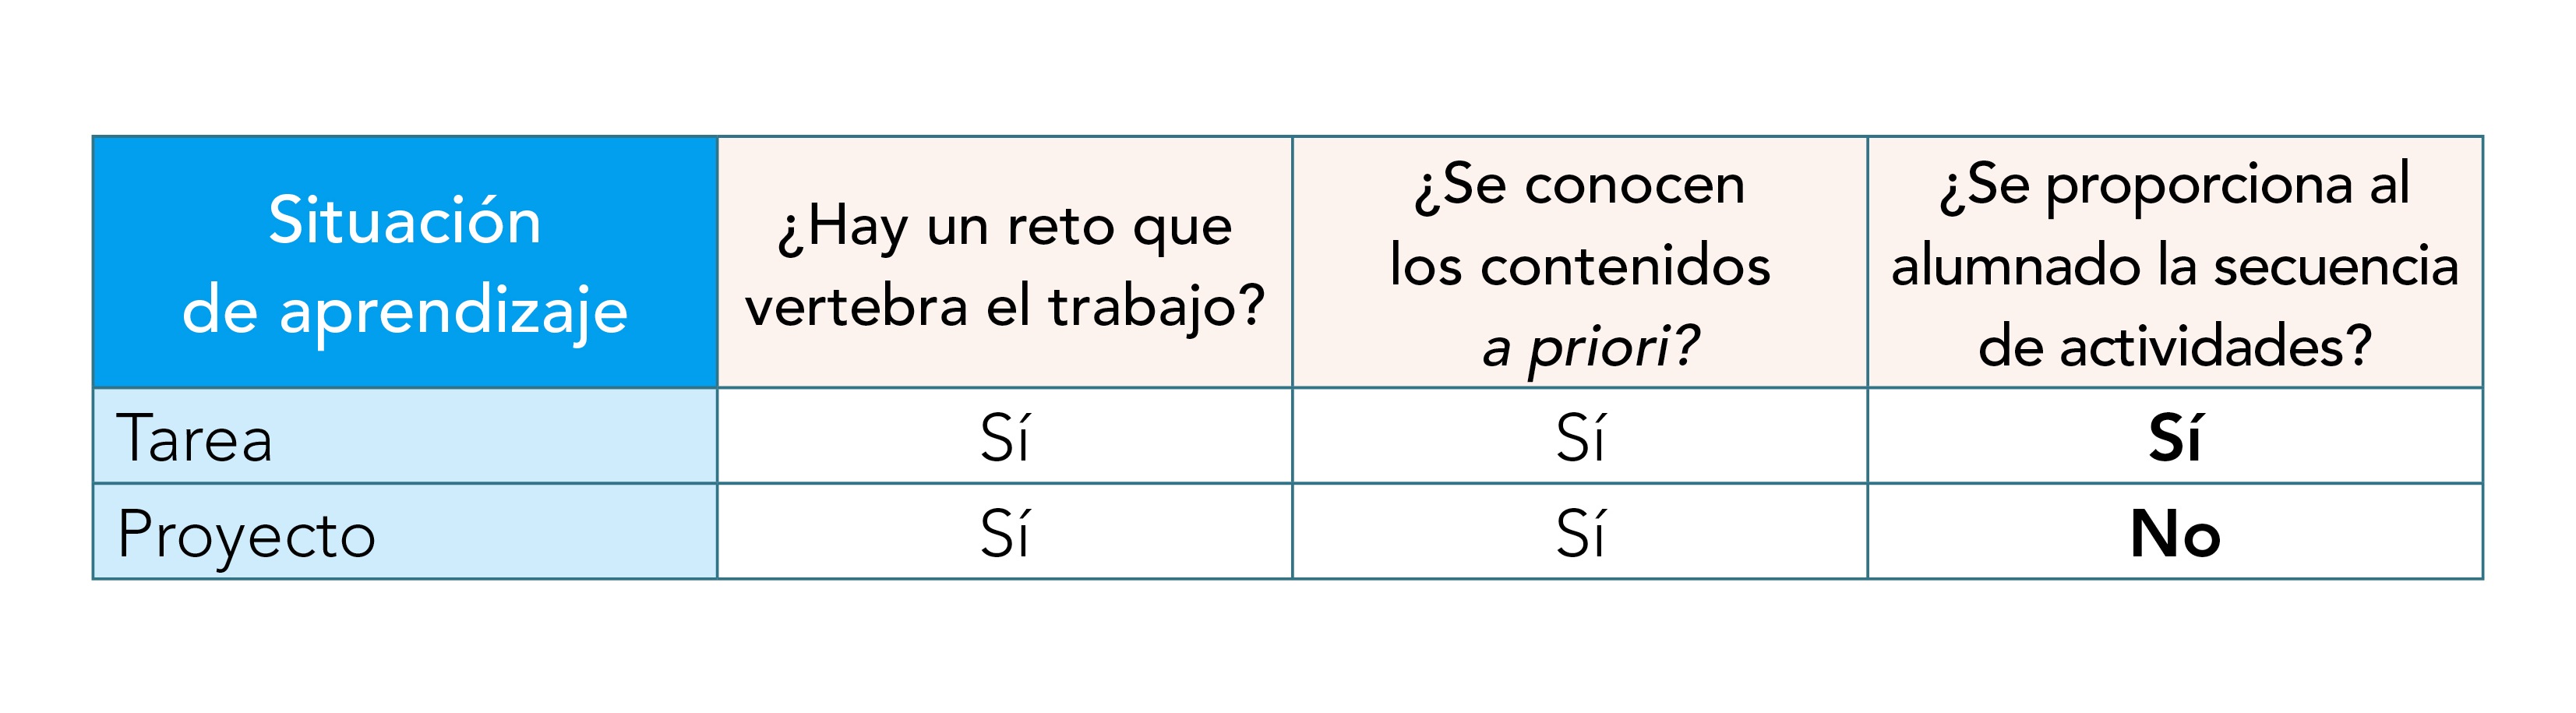 REd4_Breves_Tarea_Proyecto